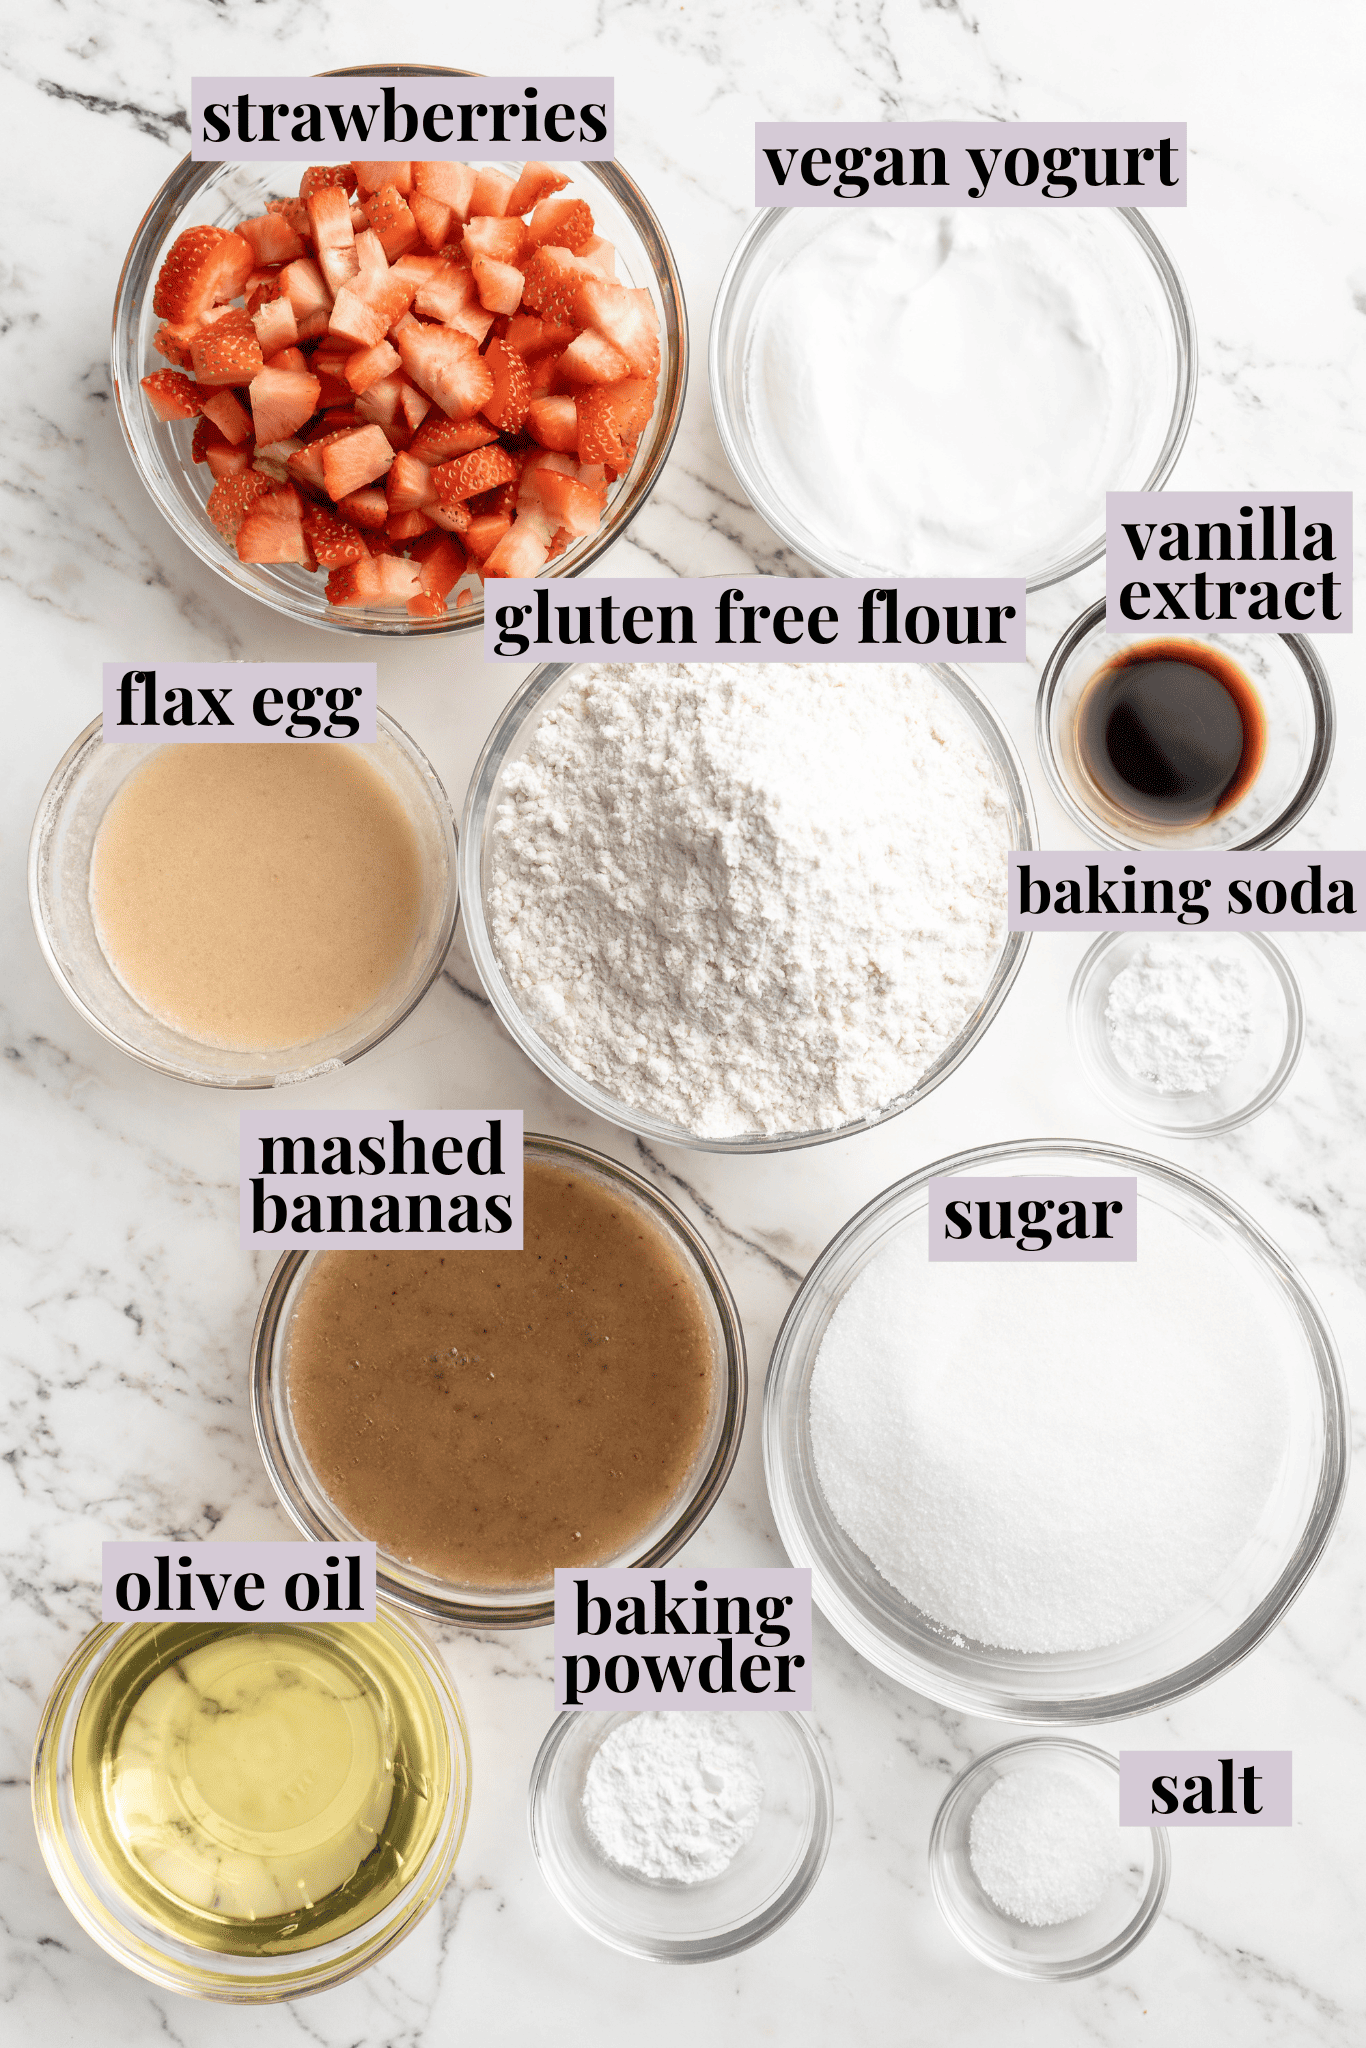 Overhead view of ingredients for strawberry banana bread with labels